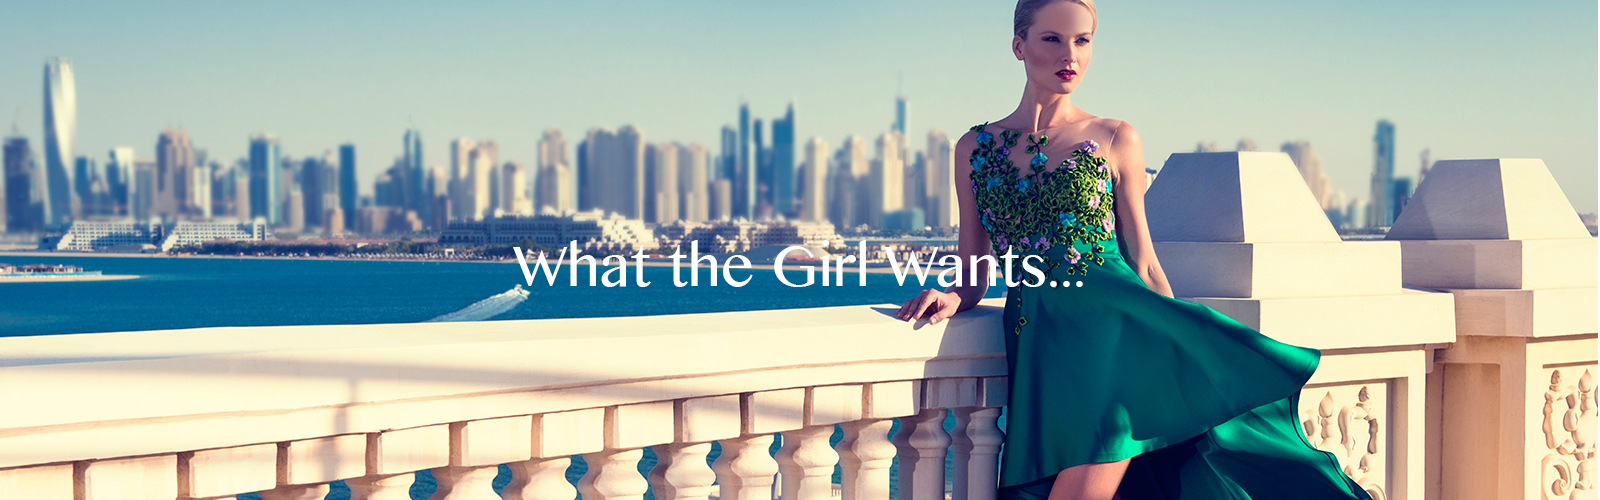 What the girl wants photo page